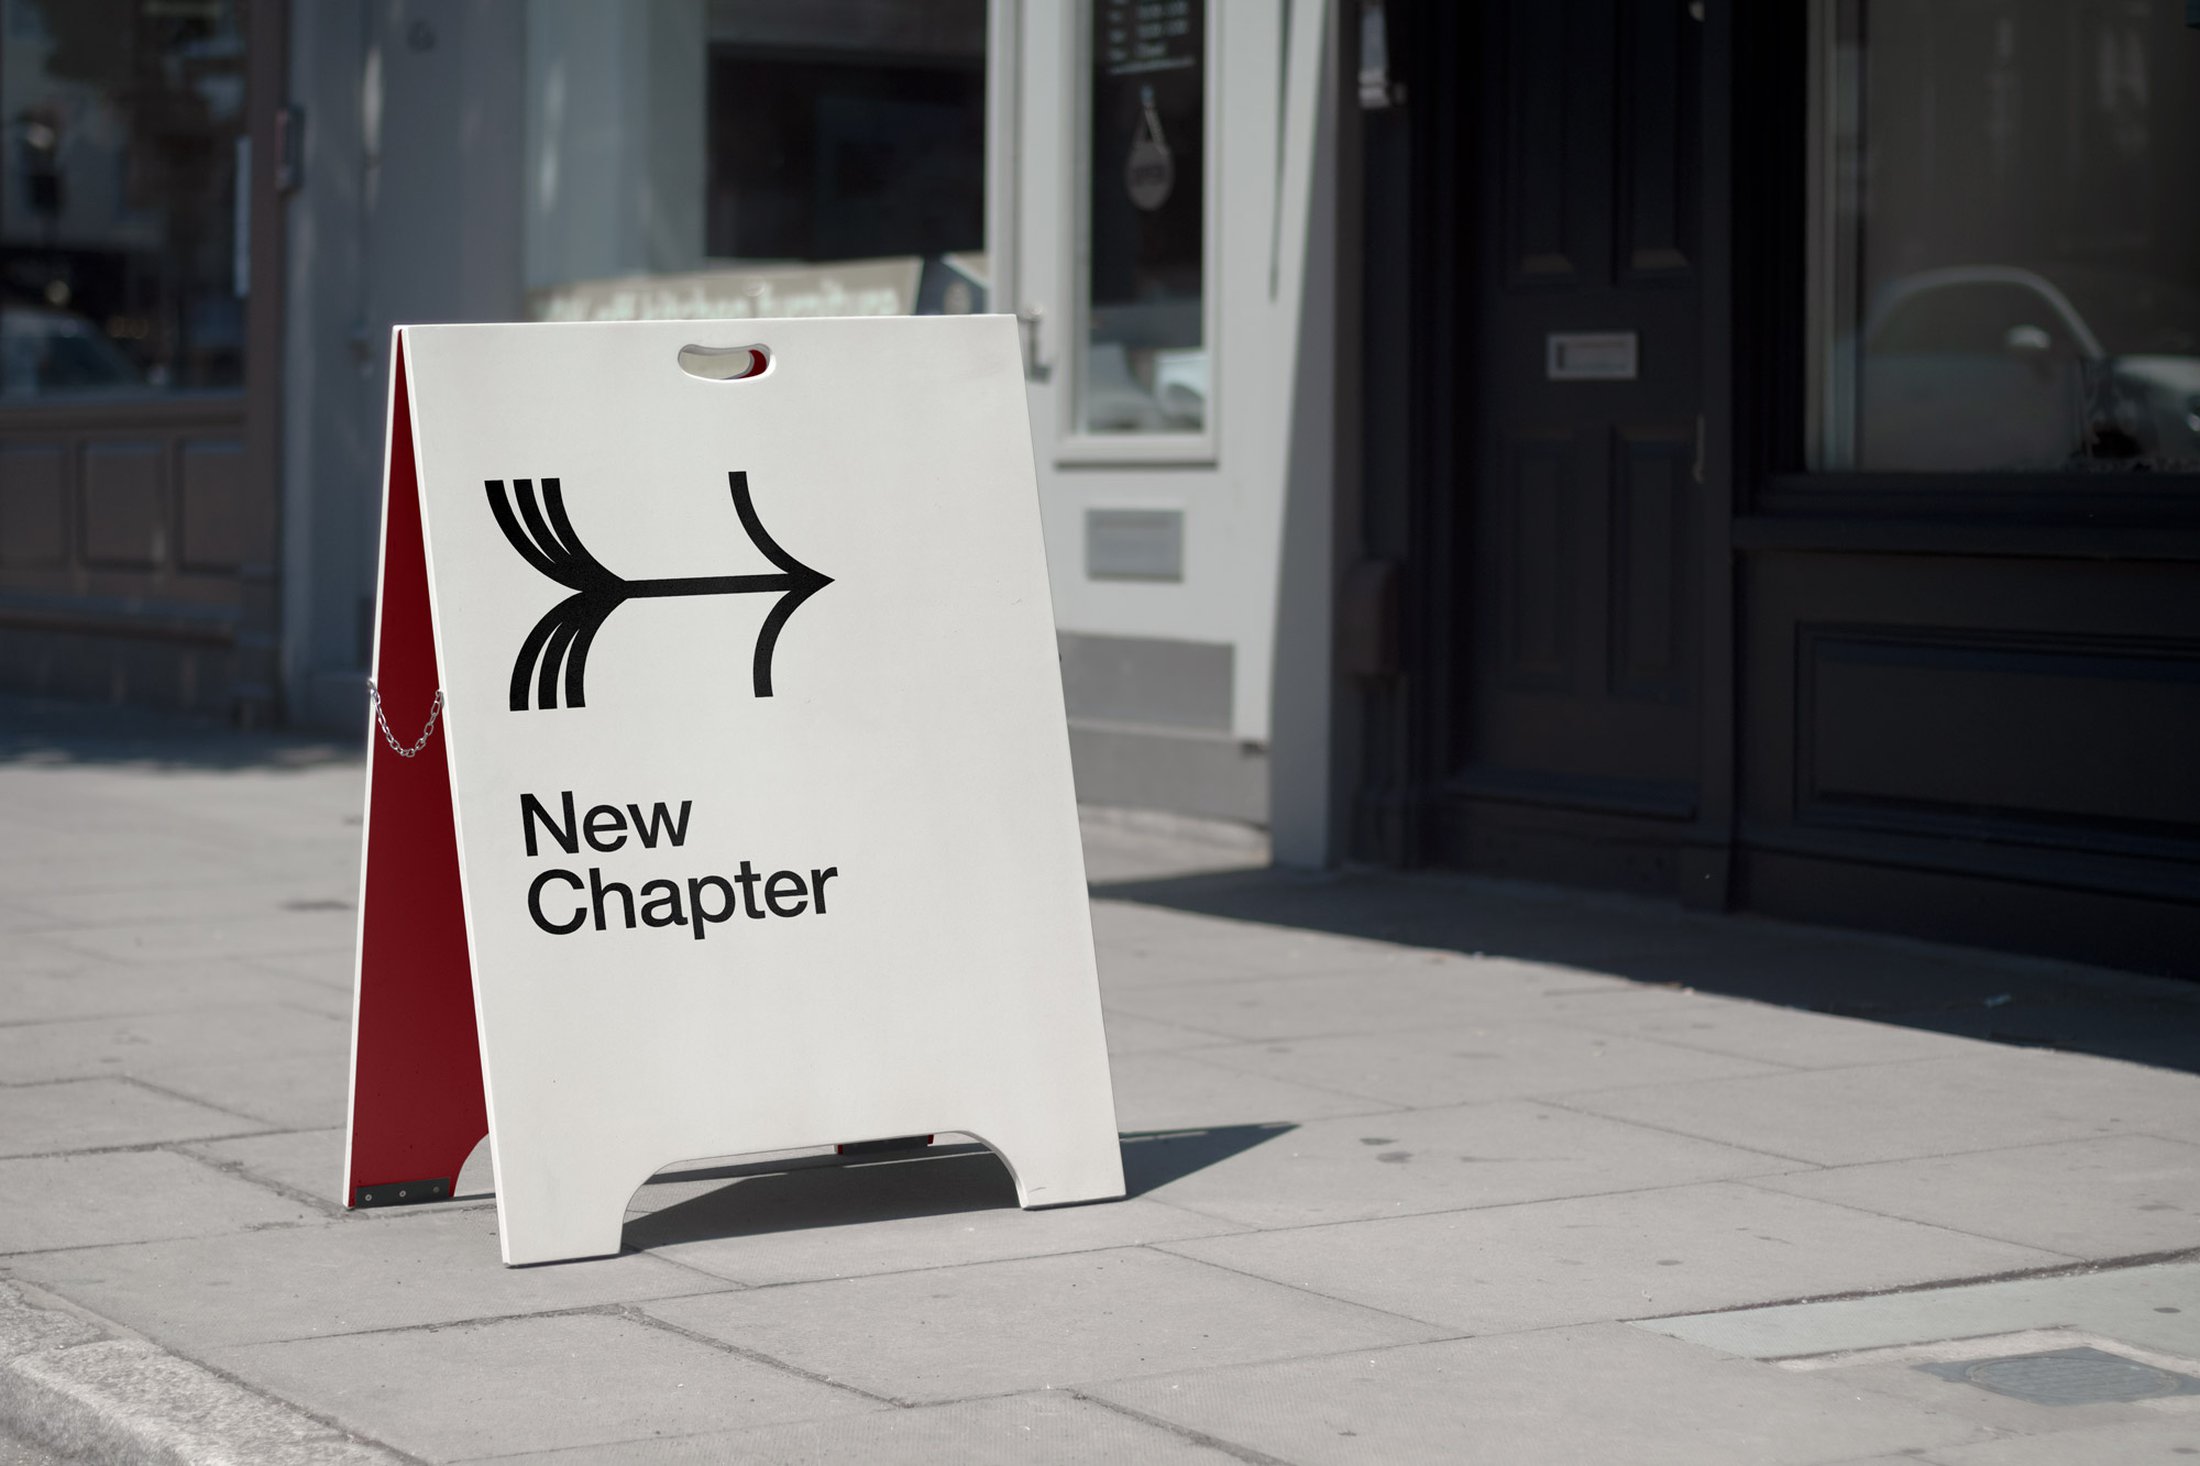 Sign Design & Way-finding – New Chapter by Paul Belford Ltd, United Kingdom